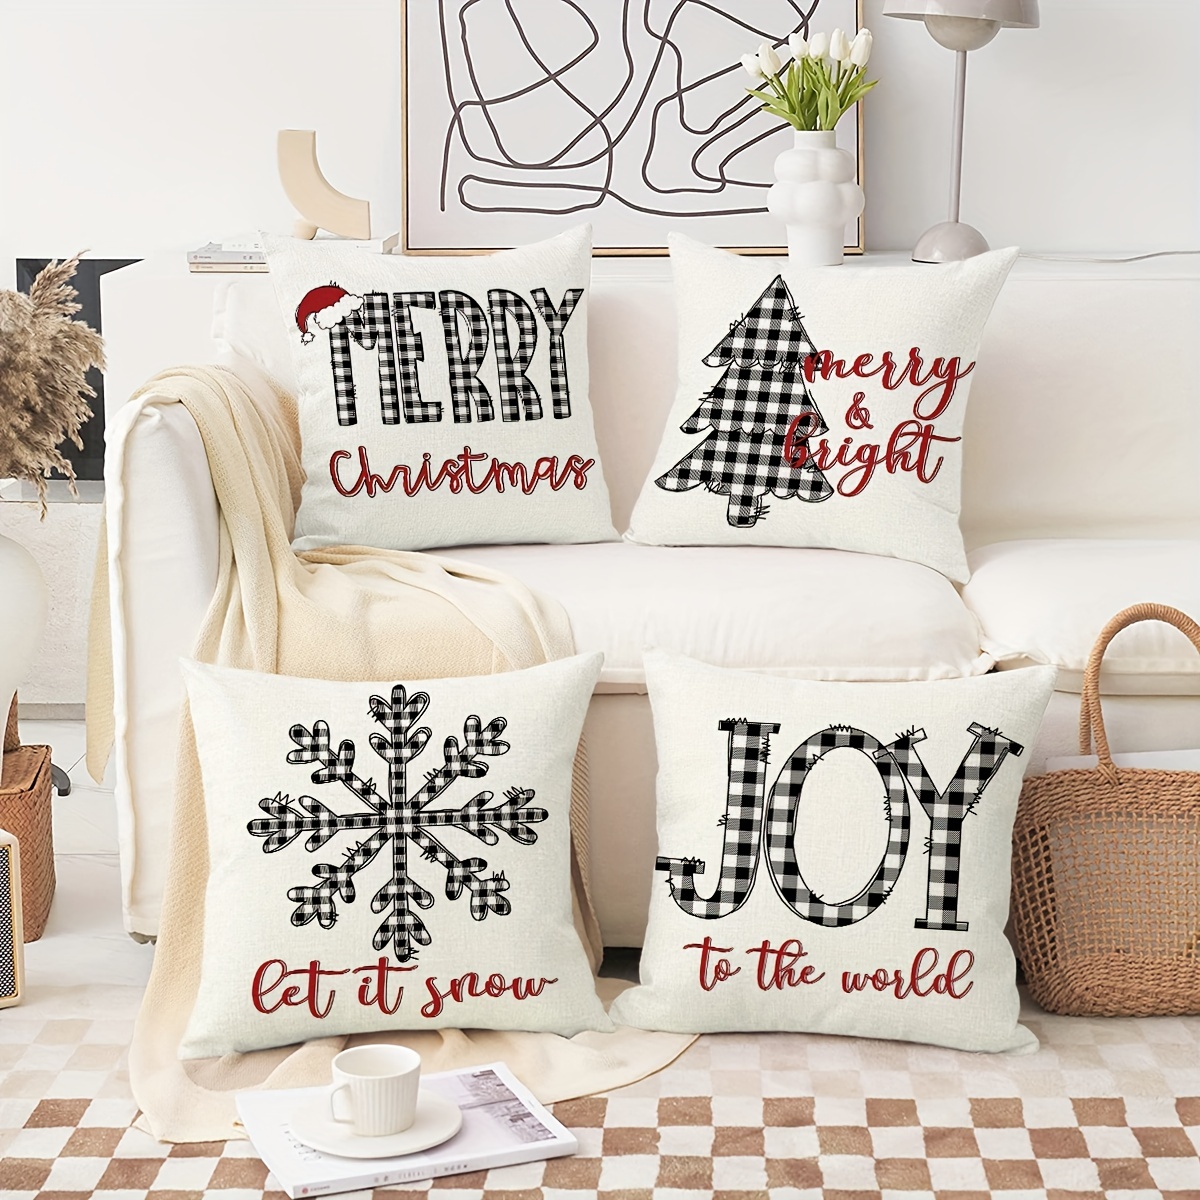 Christmas Pillow Covers - Set of 4 Throw Pillow Covers, 18 x 18 Inches  Pillow Cover, Red Plaid Throw Pillow Covers, Decorative Pillows Sofa for Couch  Christmas Decorations, Red and Black 